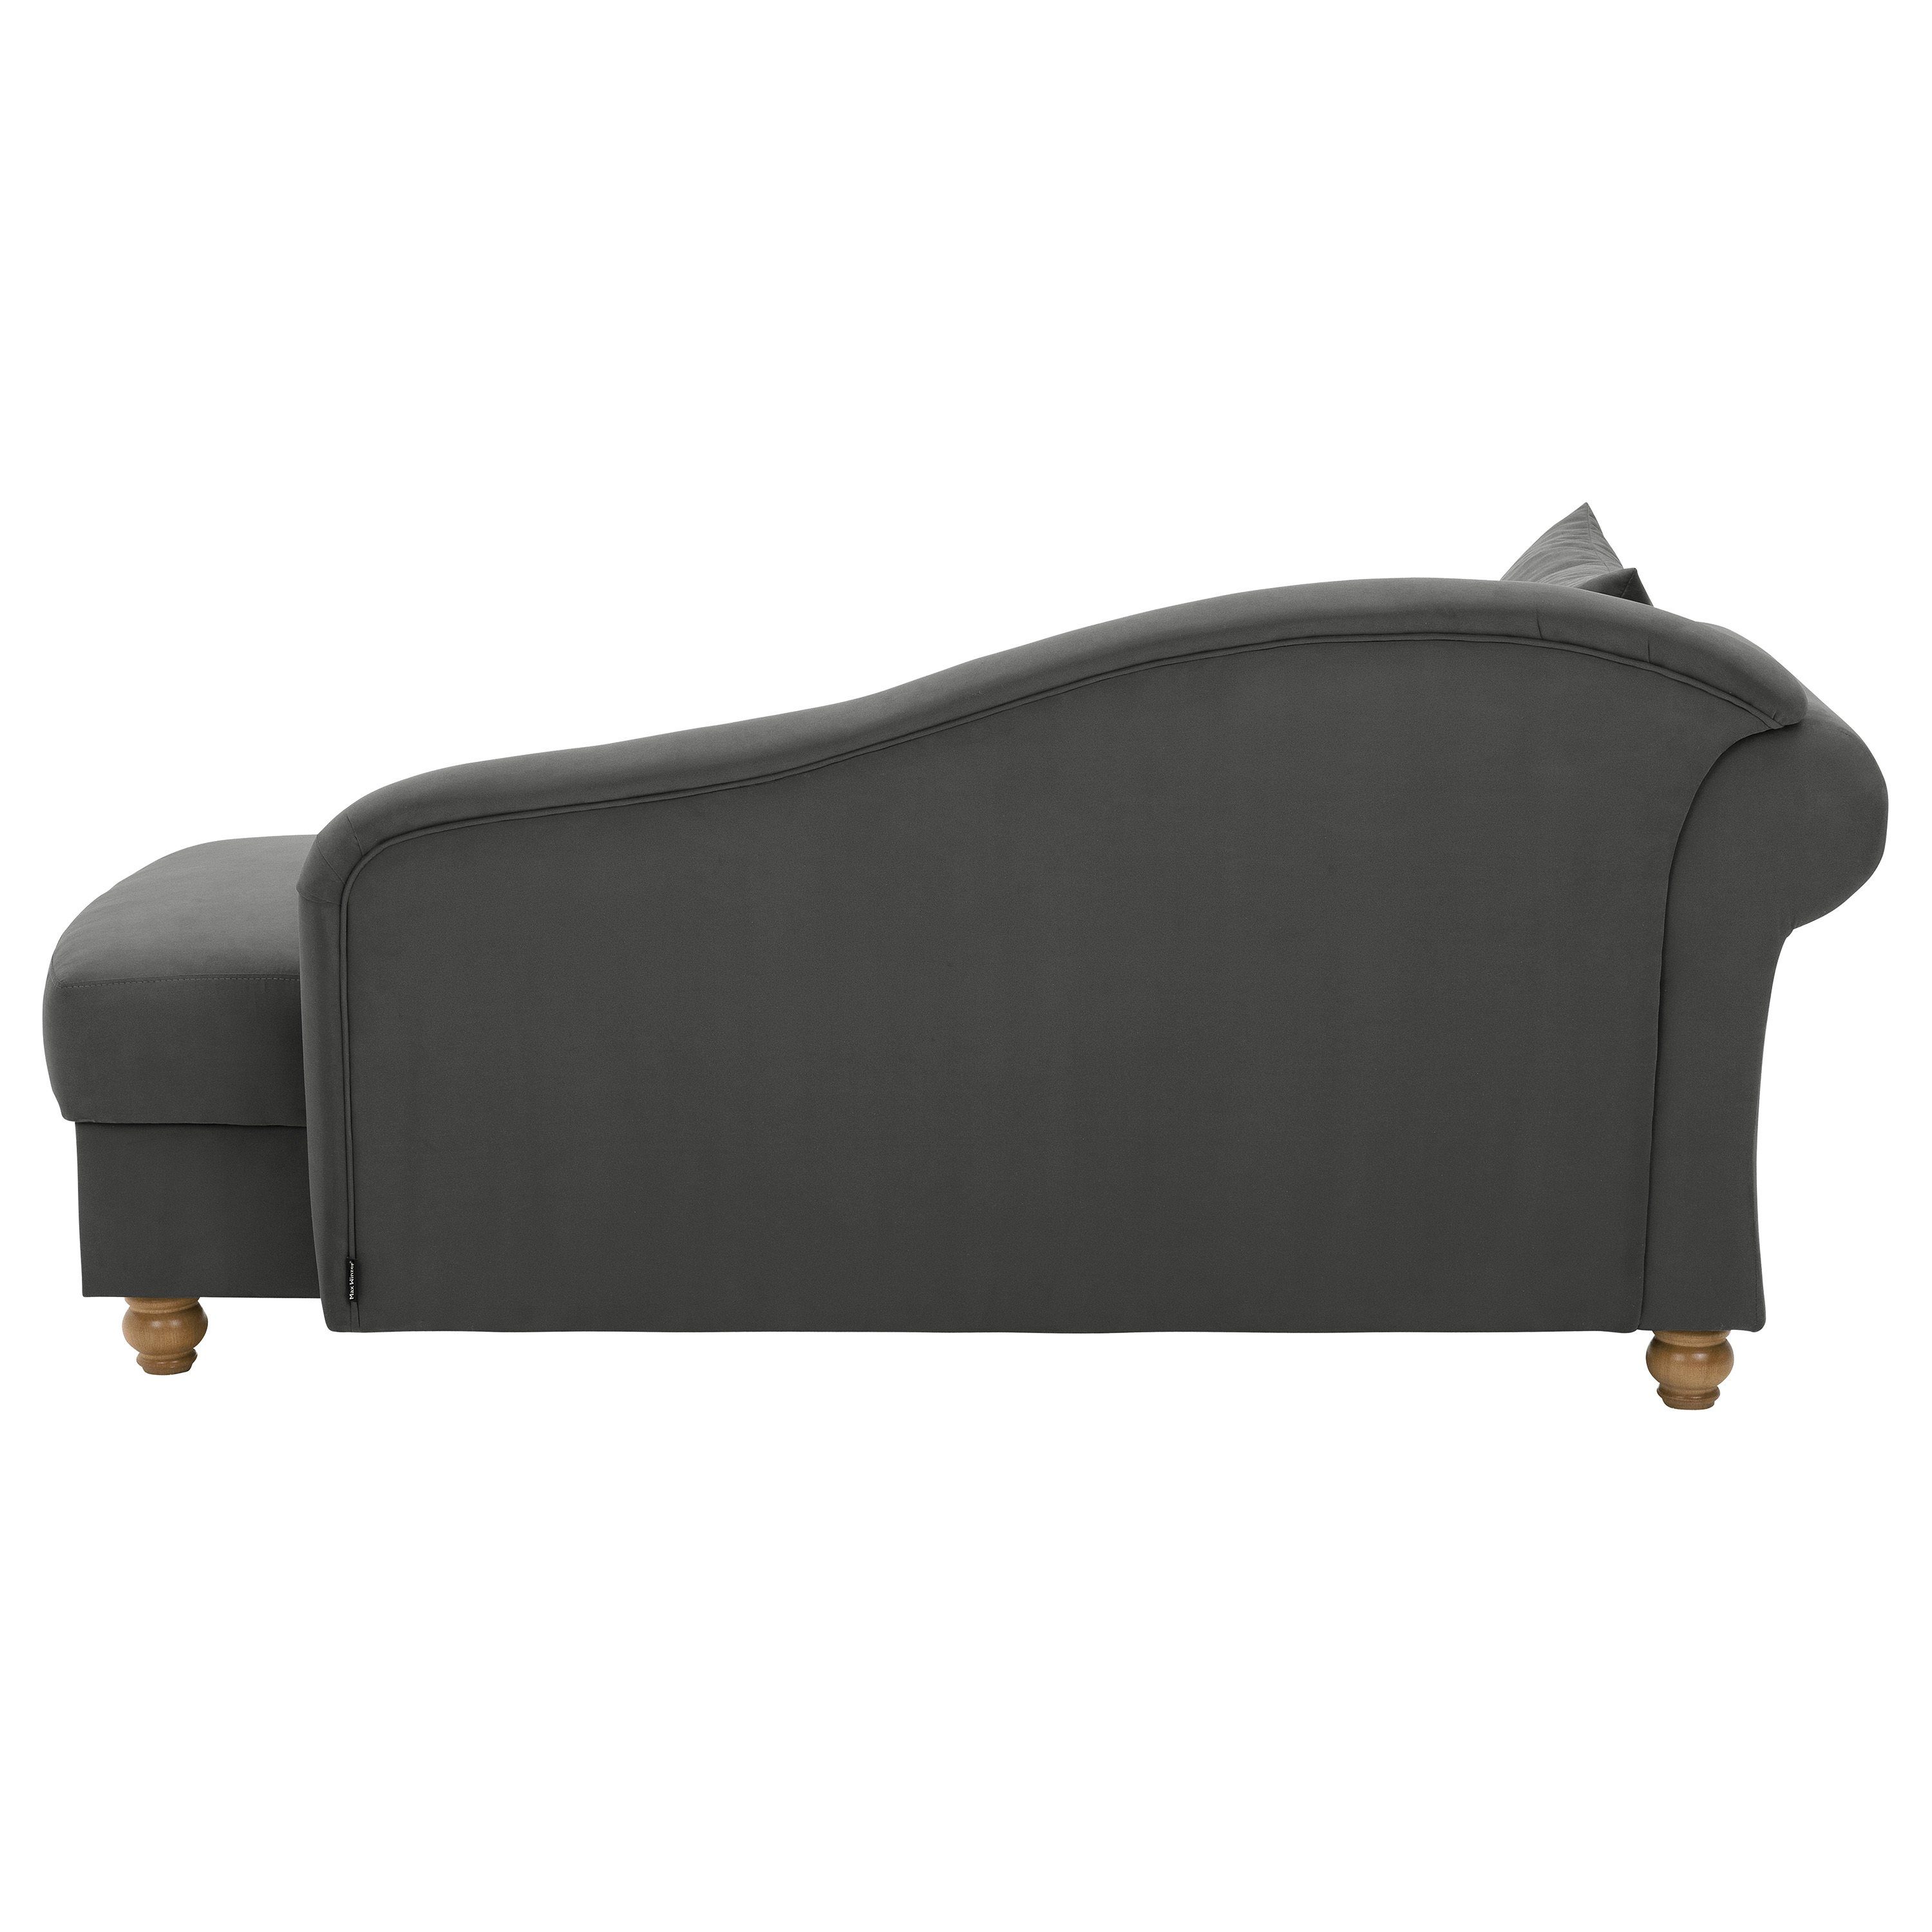 Evelyn, Recamiere Armlehne Sofa Winzer® Max links